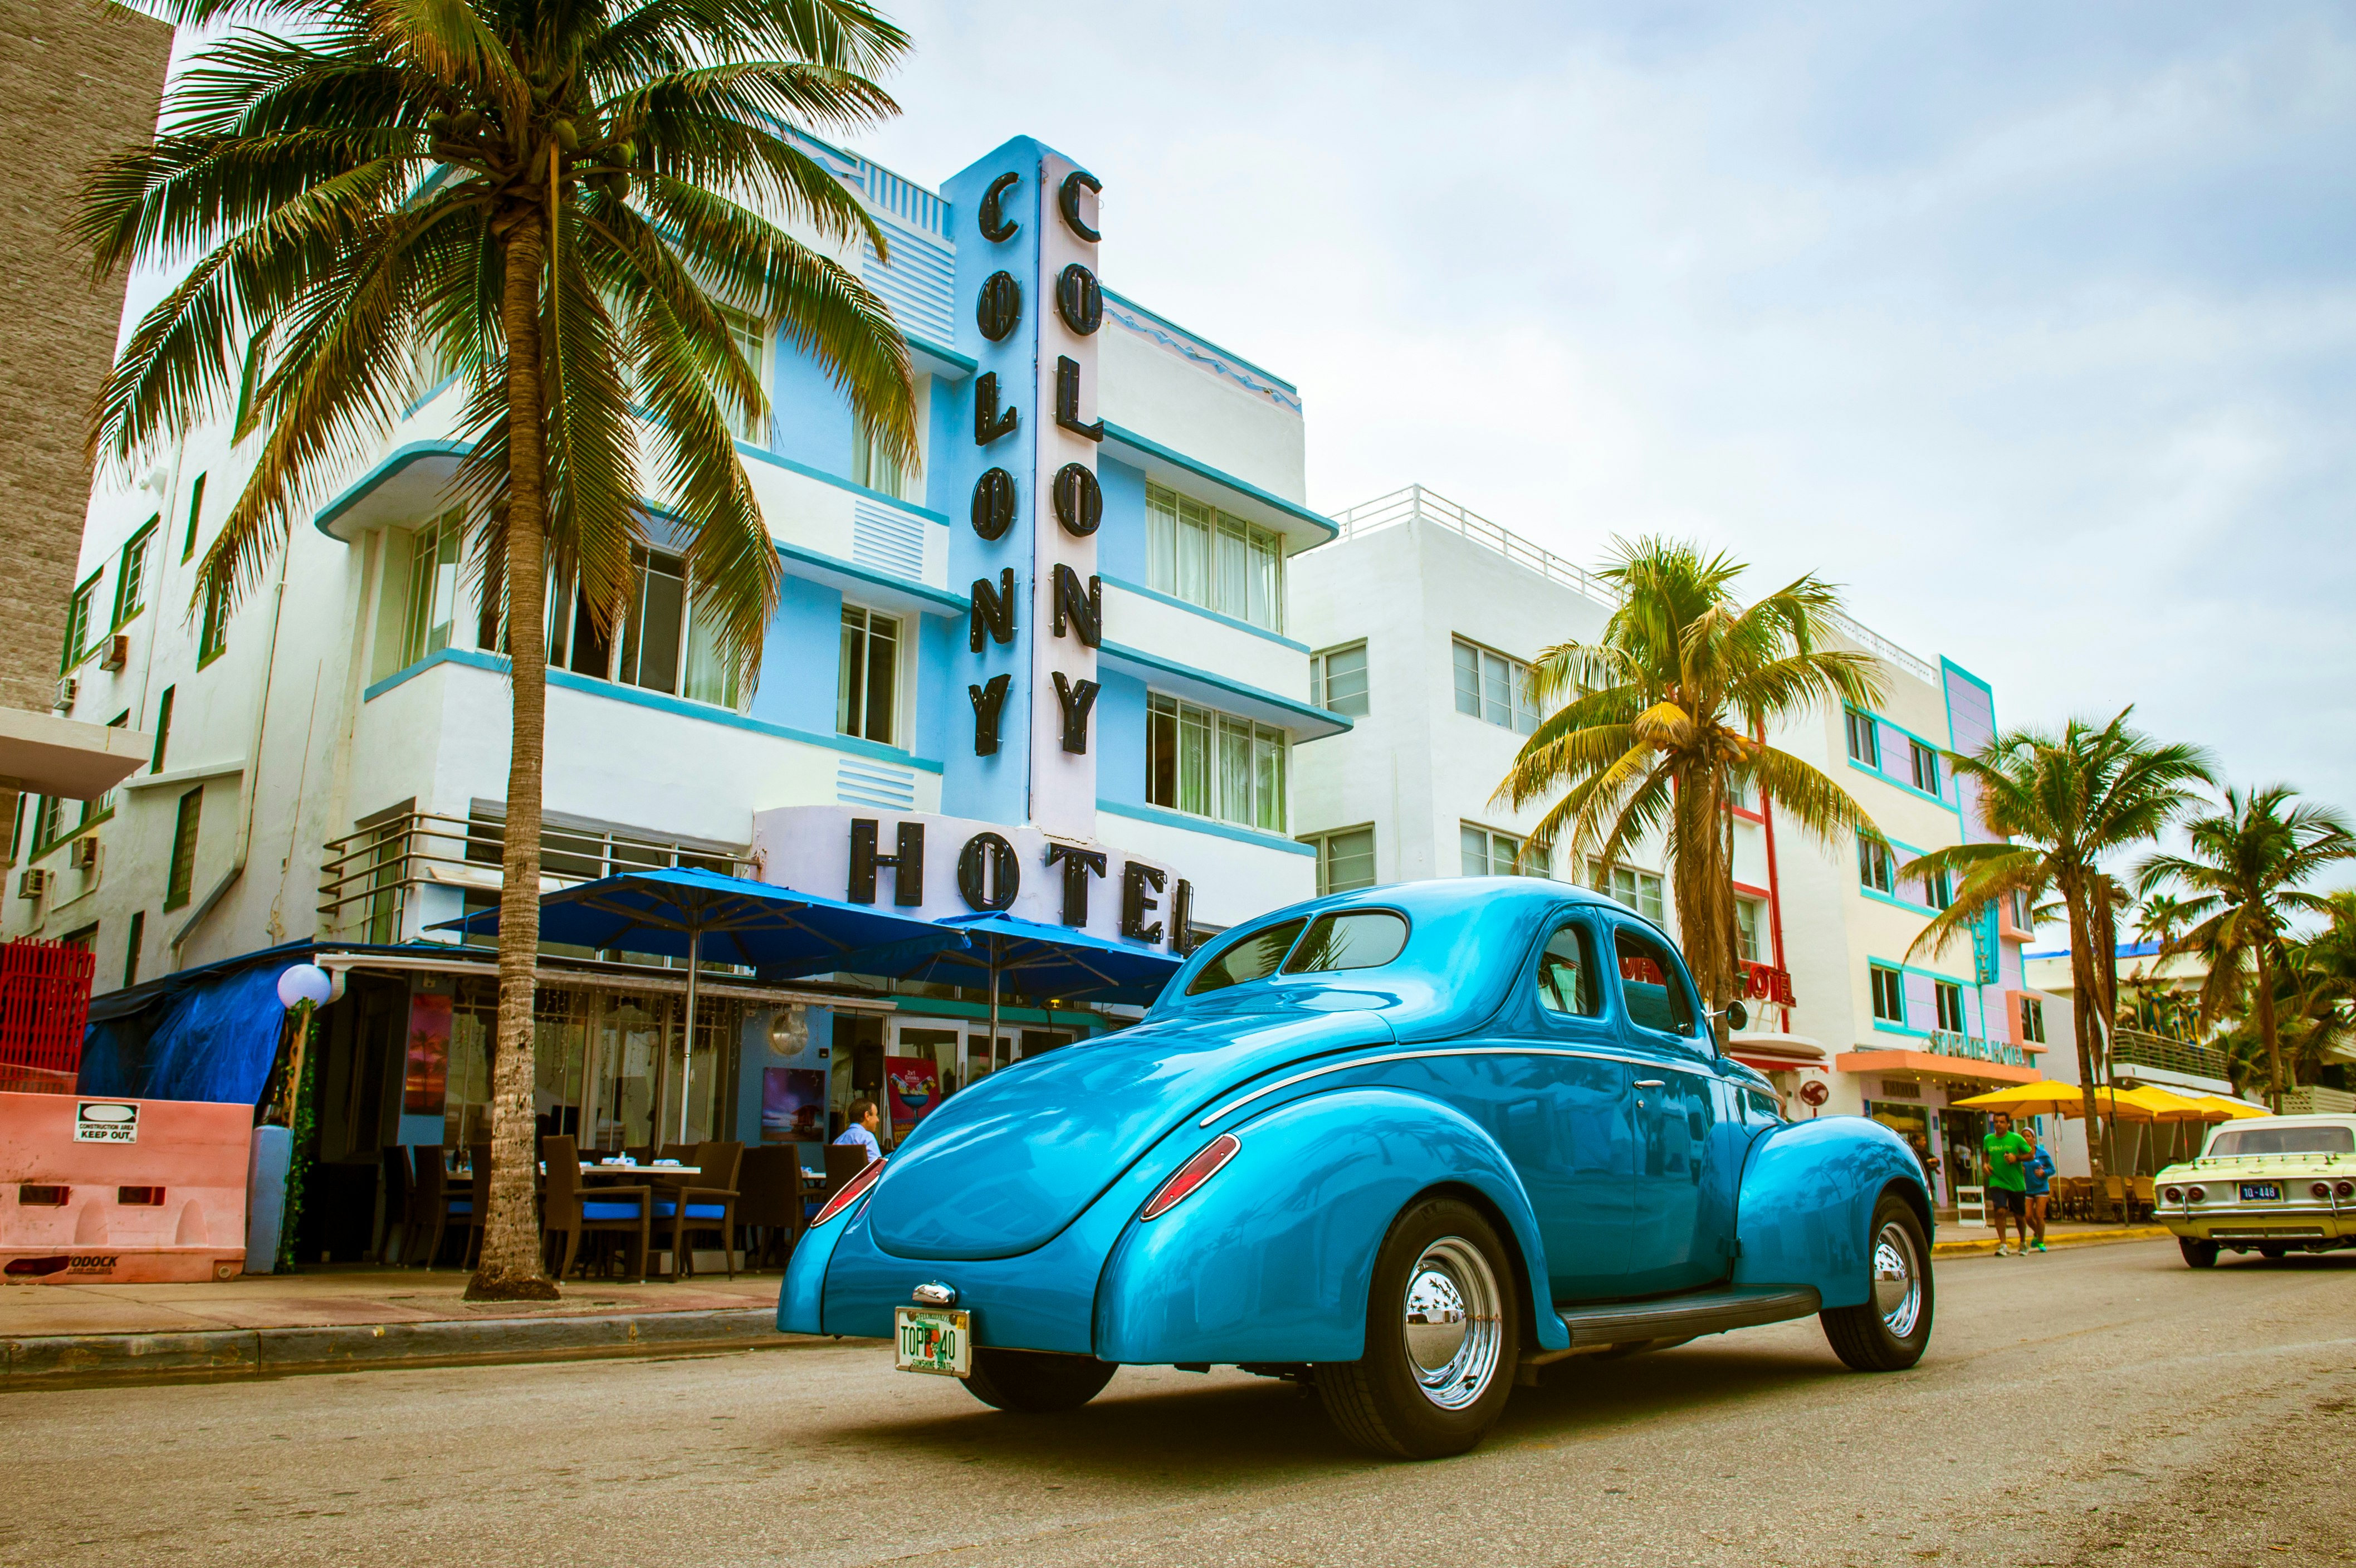 A light blue vintage car is parked outside of the Art Deco-inspired Colony Hotel in Miami. The hotel is flanked by palm trees. 